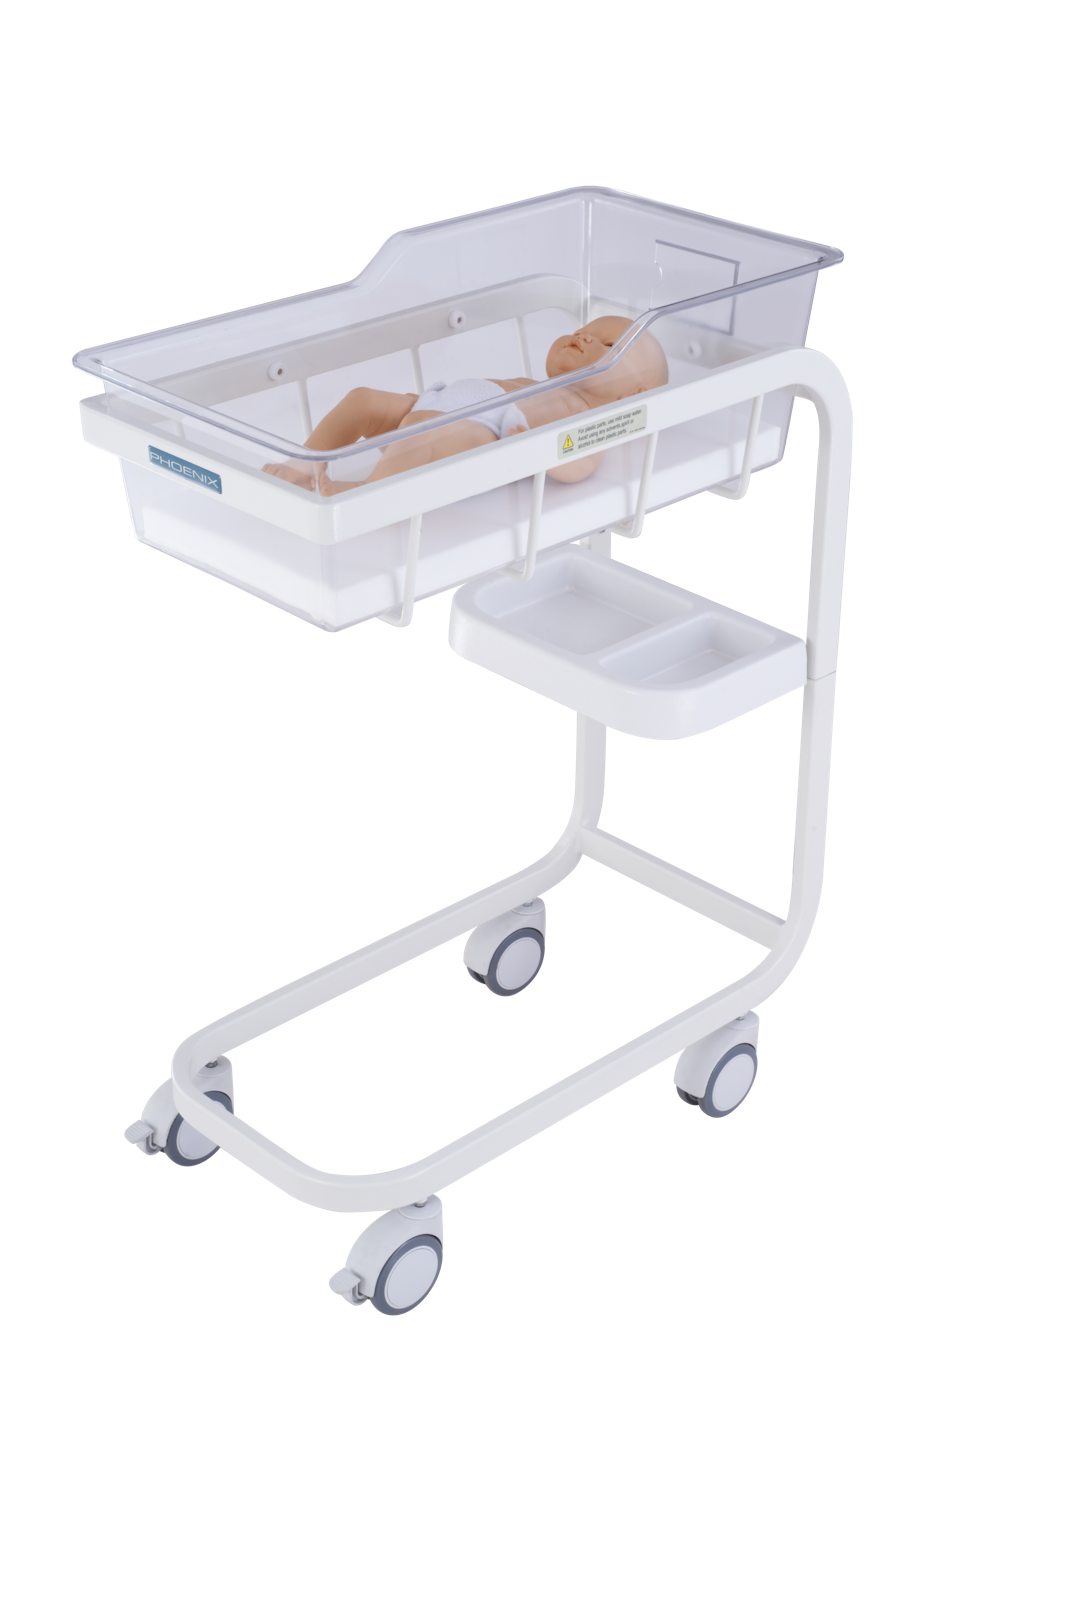 Visual example of the Infant Bassinet product